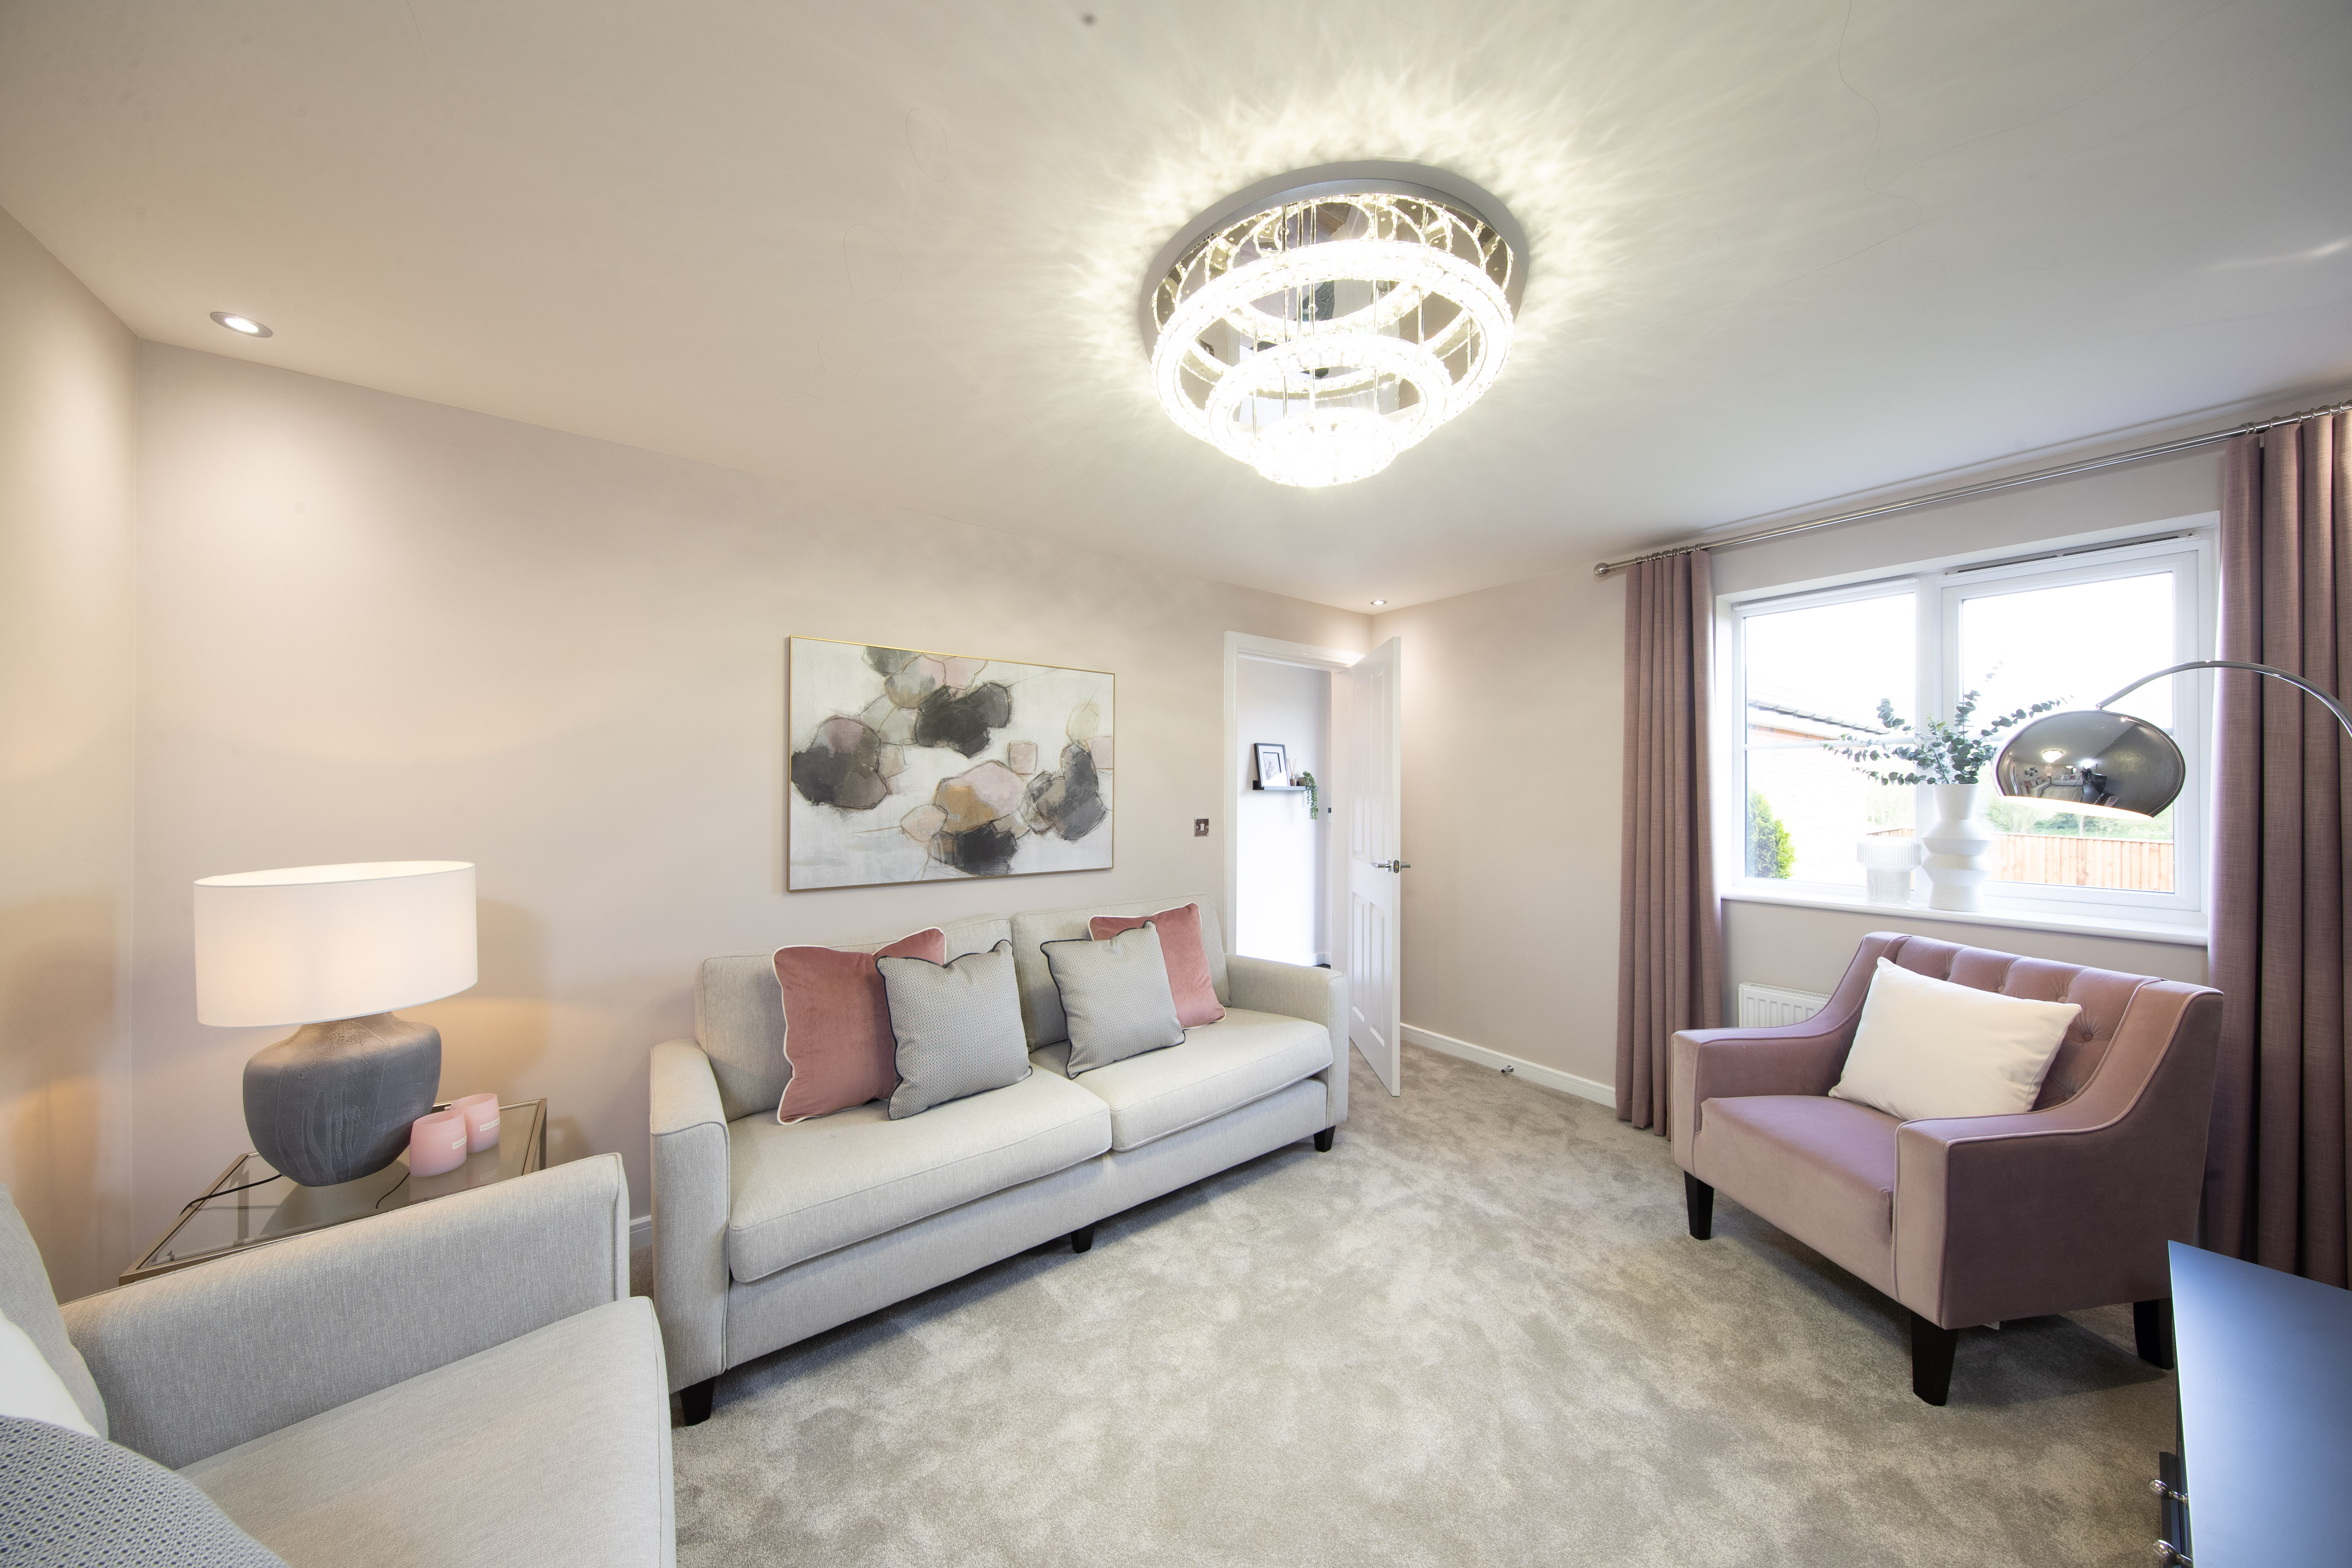 Property 1 of 15. Showhome Photography